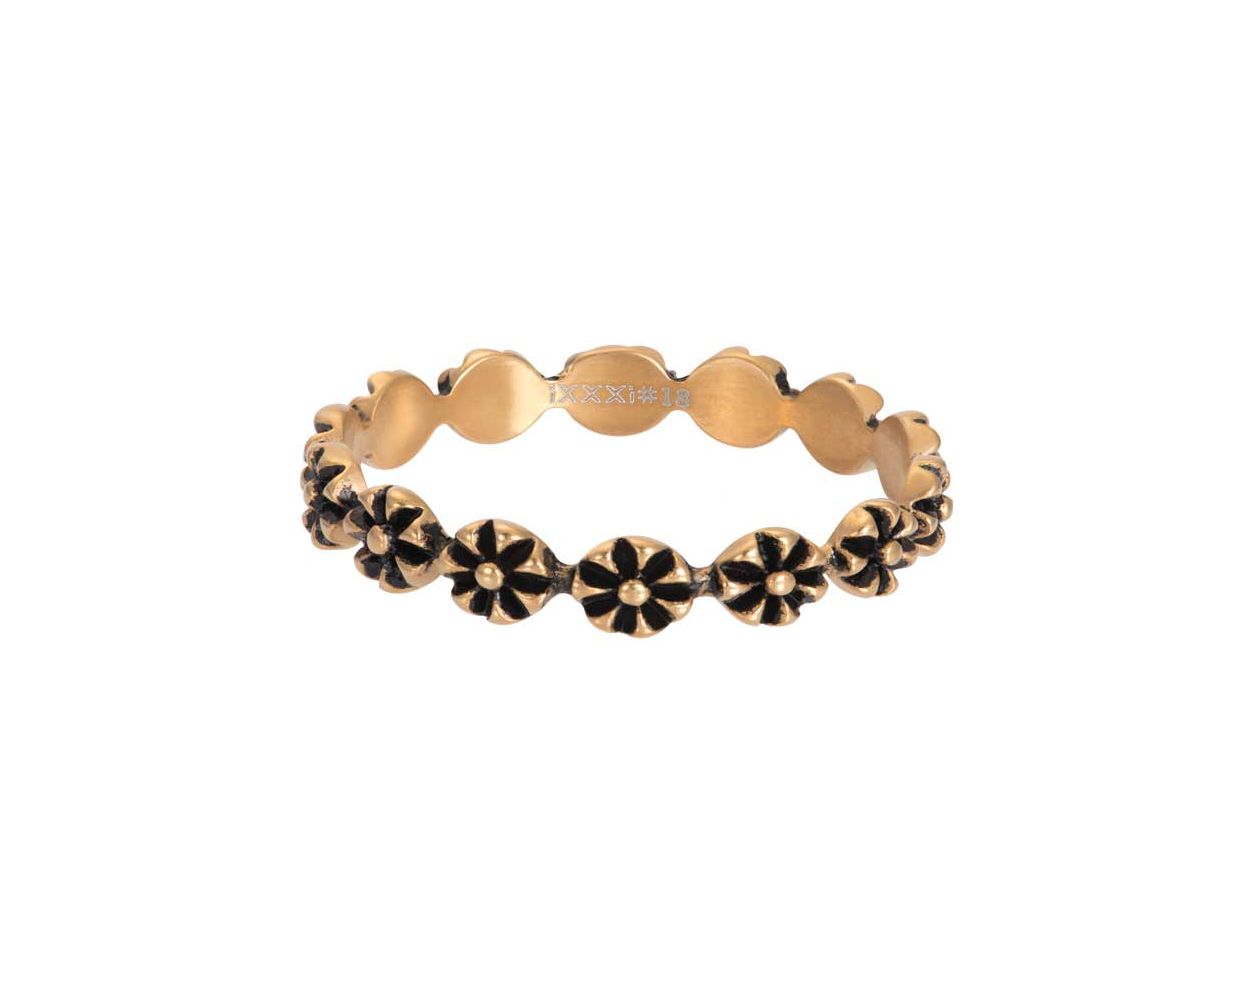 iXXXi Ring Flowers Gold Color - R06004